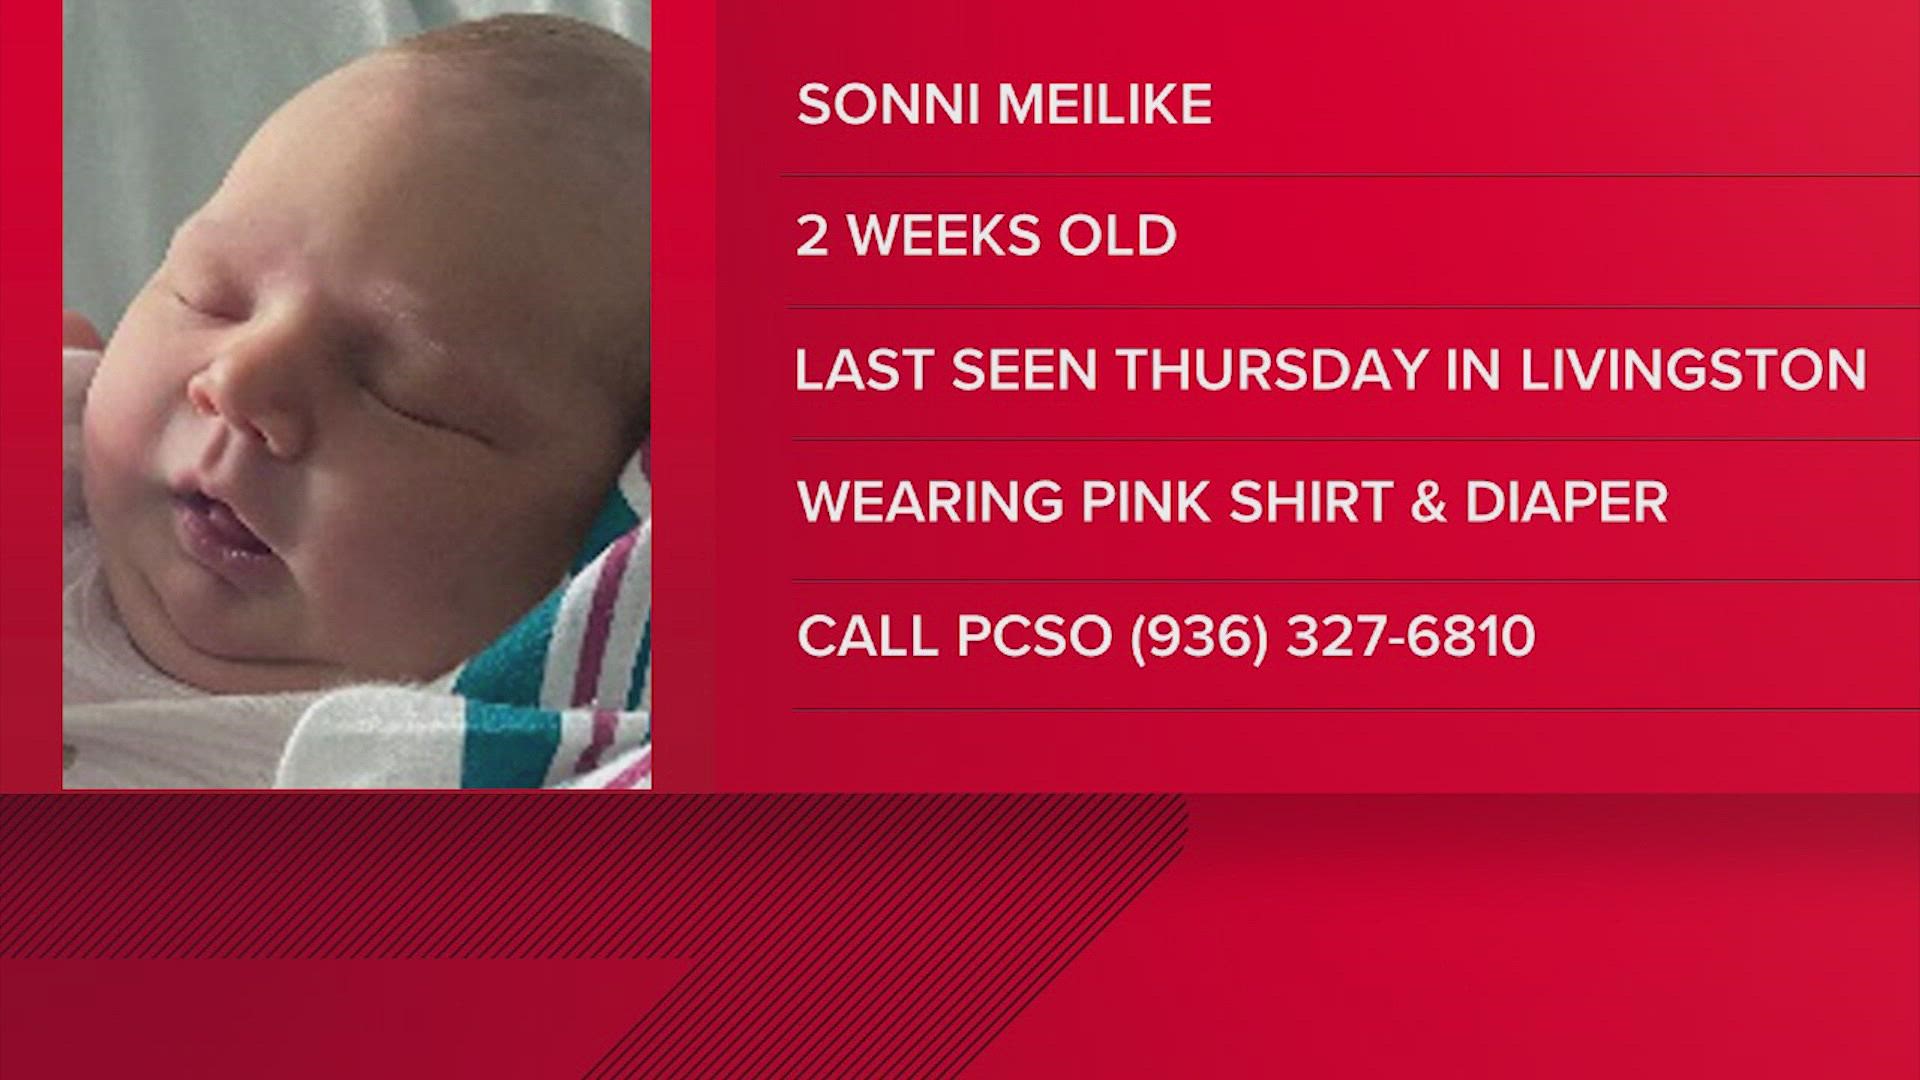 An AMBER Alert has been issued for a 2-week-old who is believed to be with her mother who does not have custody. The newborn was last seen Thursday in Livingston.